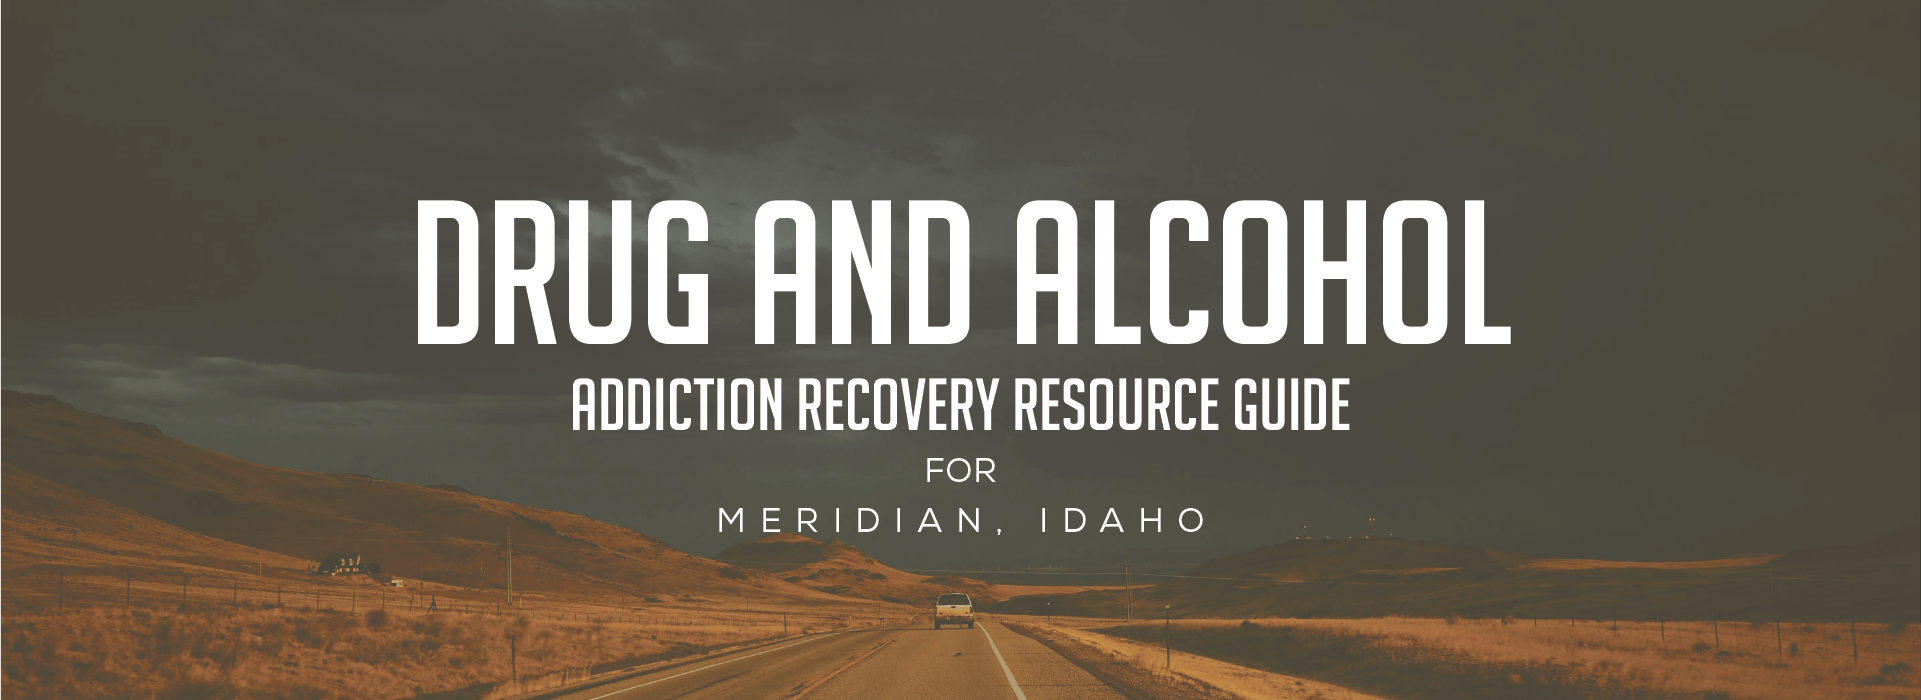 Drug and alcohol, addiction recovery resource guide for Meridian, Idaho